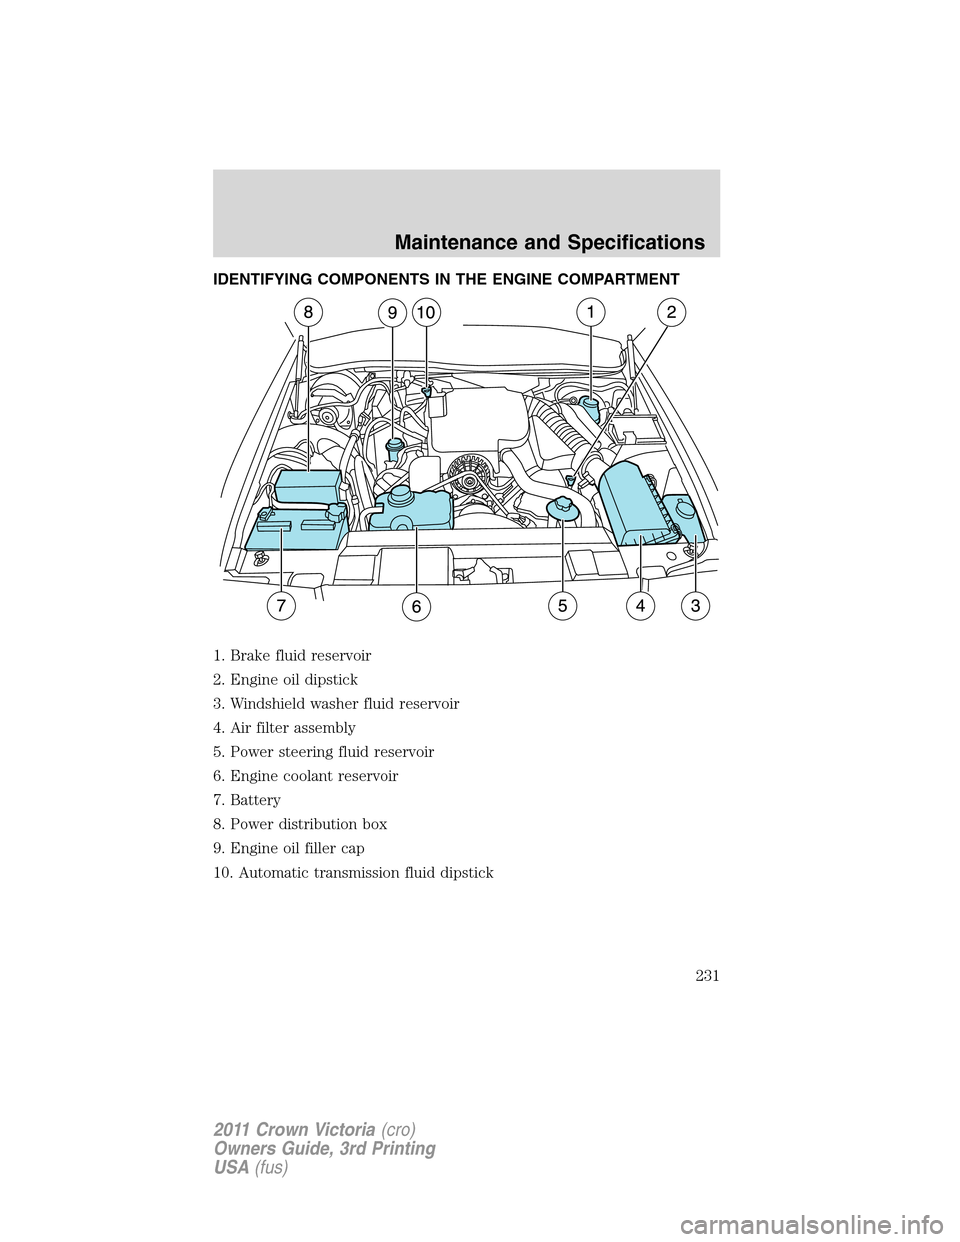 Mercury Grand Marquis 1011  Owners Manuals IDENTIFYING COMPONENTS IN THE ENGINE COMPARTMENT
1. Brake fluid reservoir
2. Engine oil dipstick
3. Windshield washer fluid reservoir
4. Air filter assembly
5. Power steering fluid reservoir
6. Engine